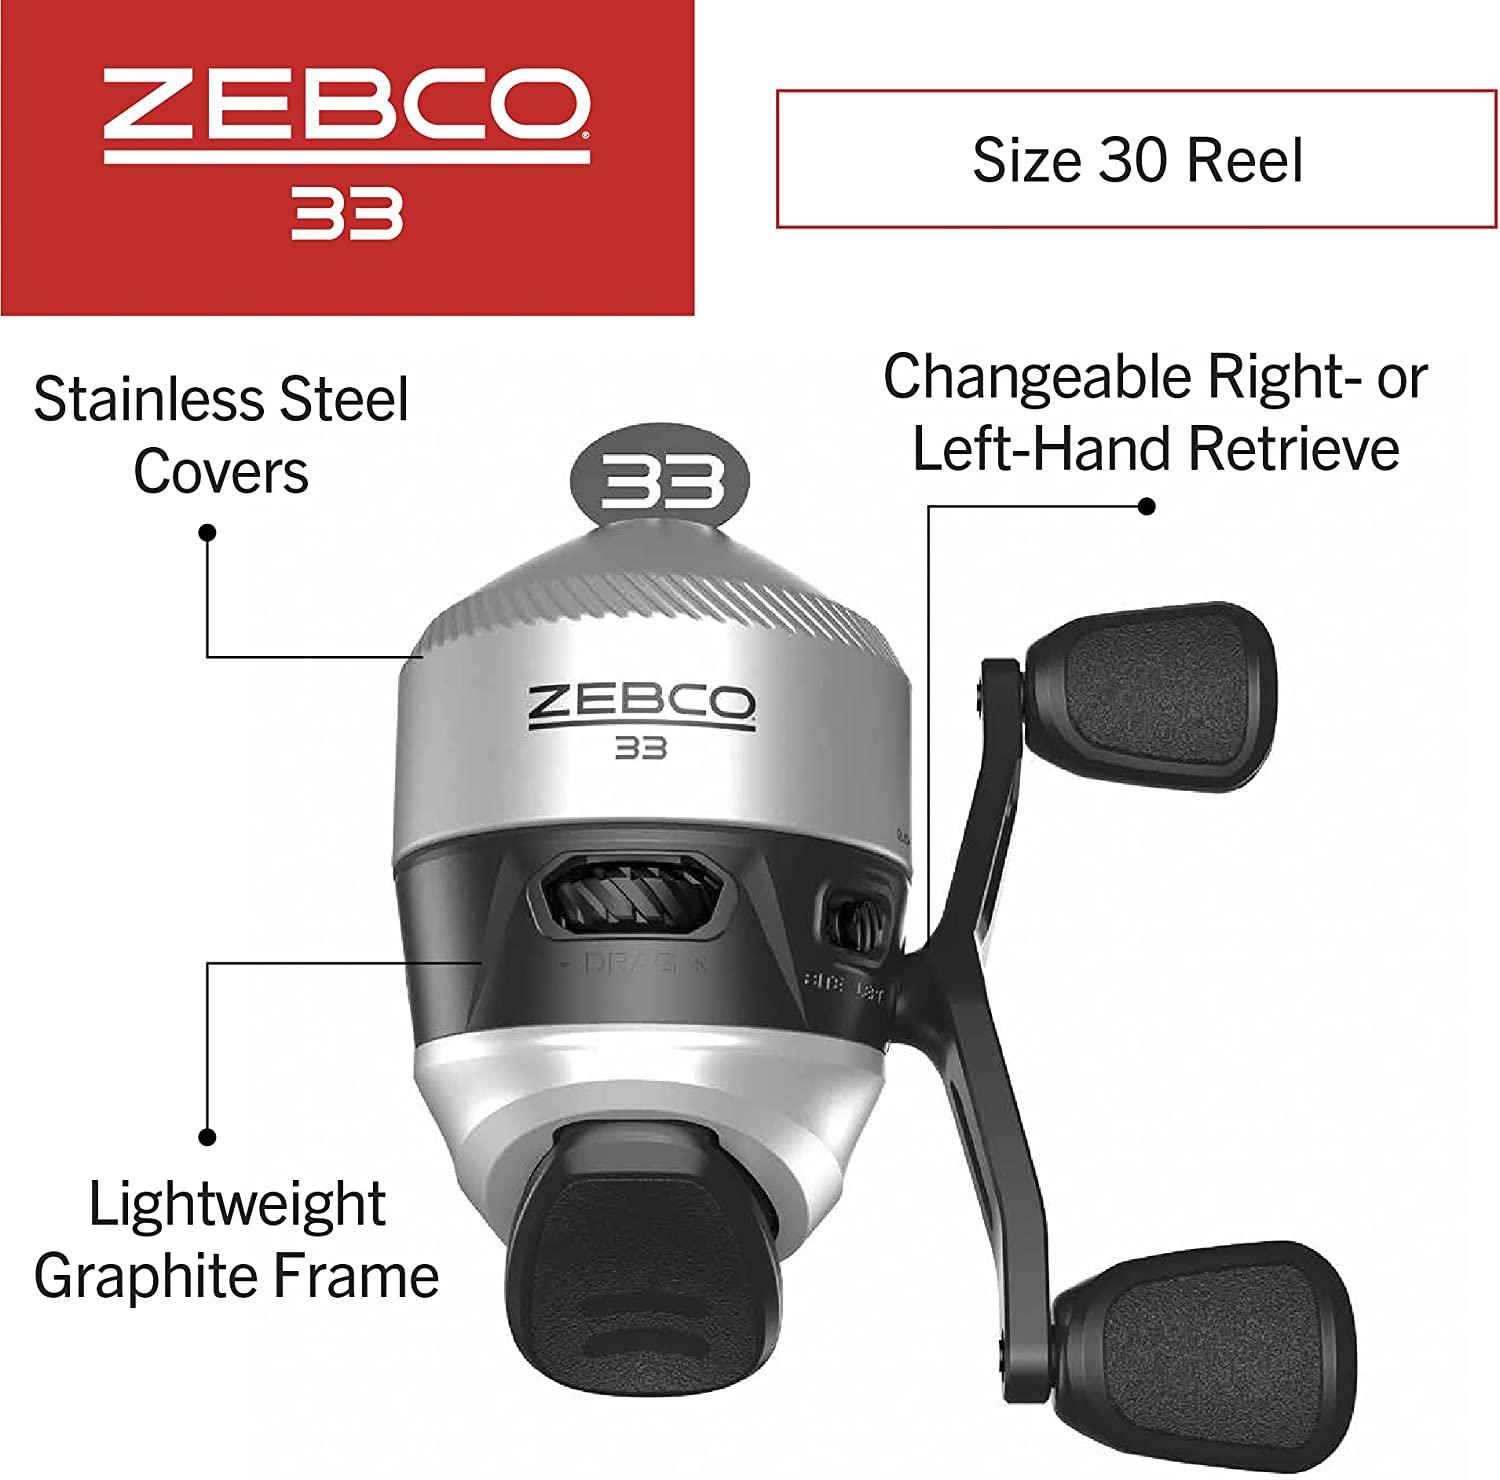  Zebco 33 Spincast Reel and Fishing Rod Combos